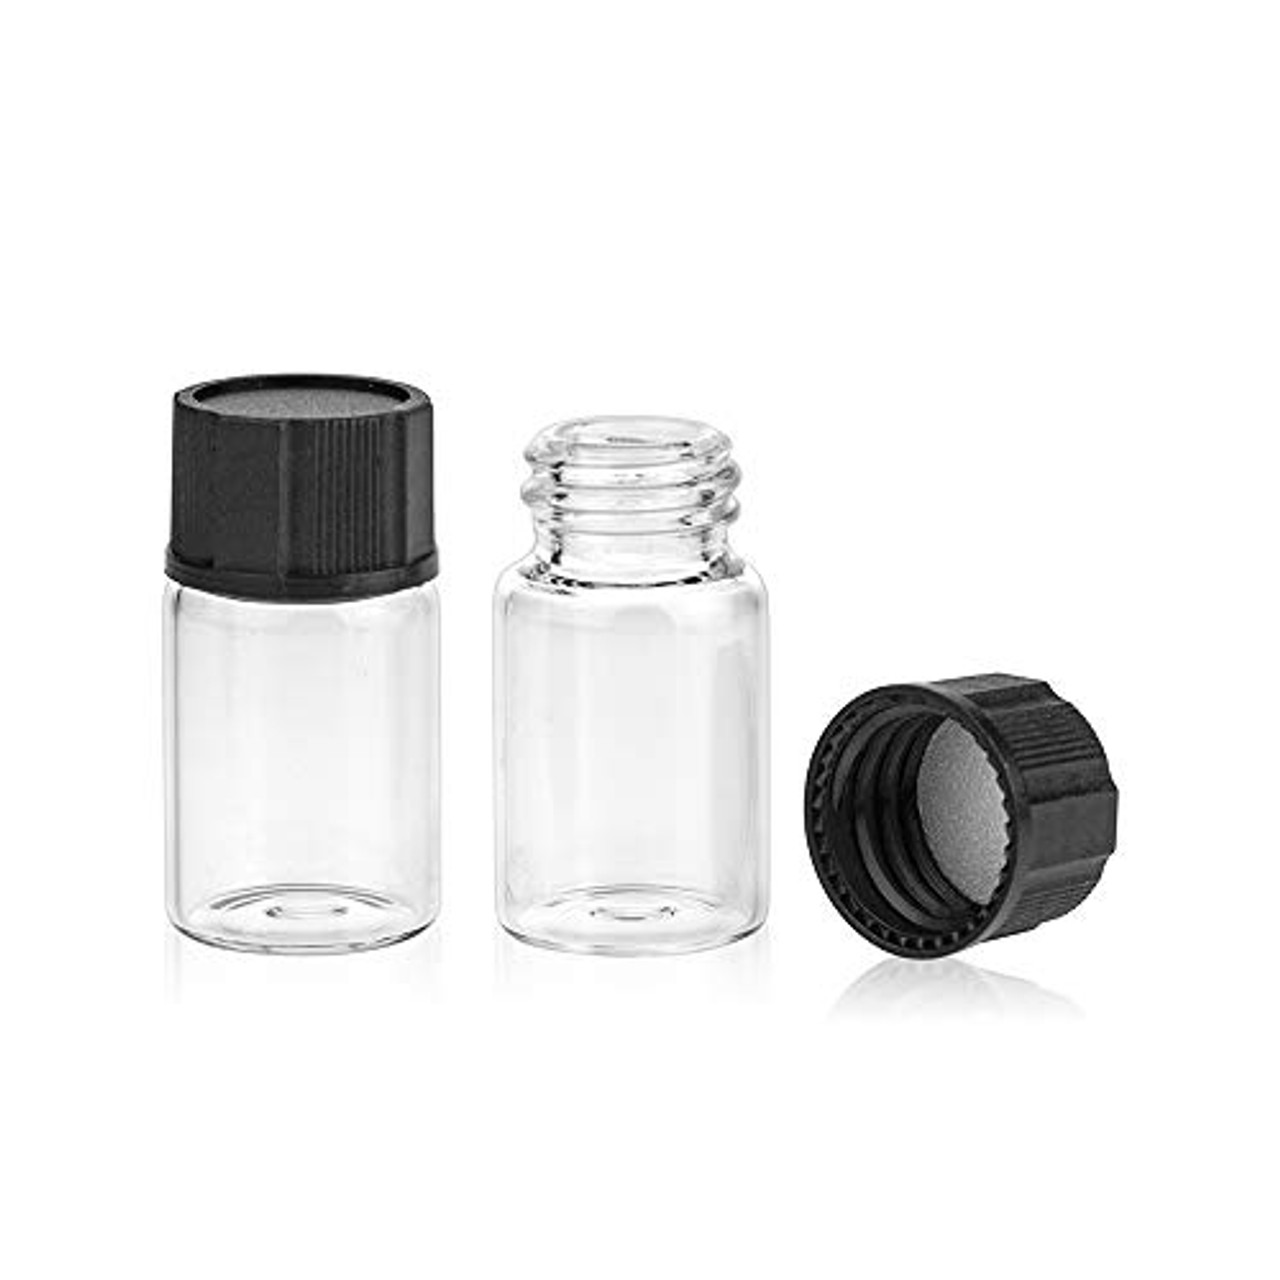 ESHATO 100 Pieces Glass Sample Vial, Liquid Sampling Small Glass Bottle  with Black Plastic Screw Caps, Leakproof, Light Weight and Corrosion  Resistance (20ML, Clear)